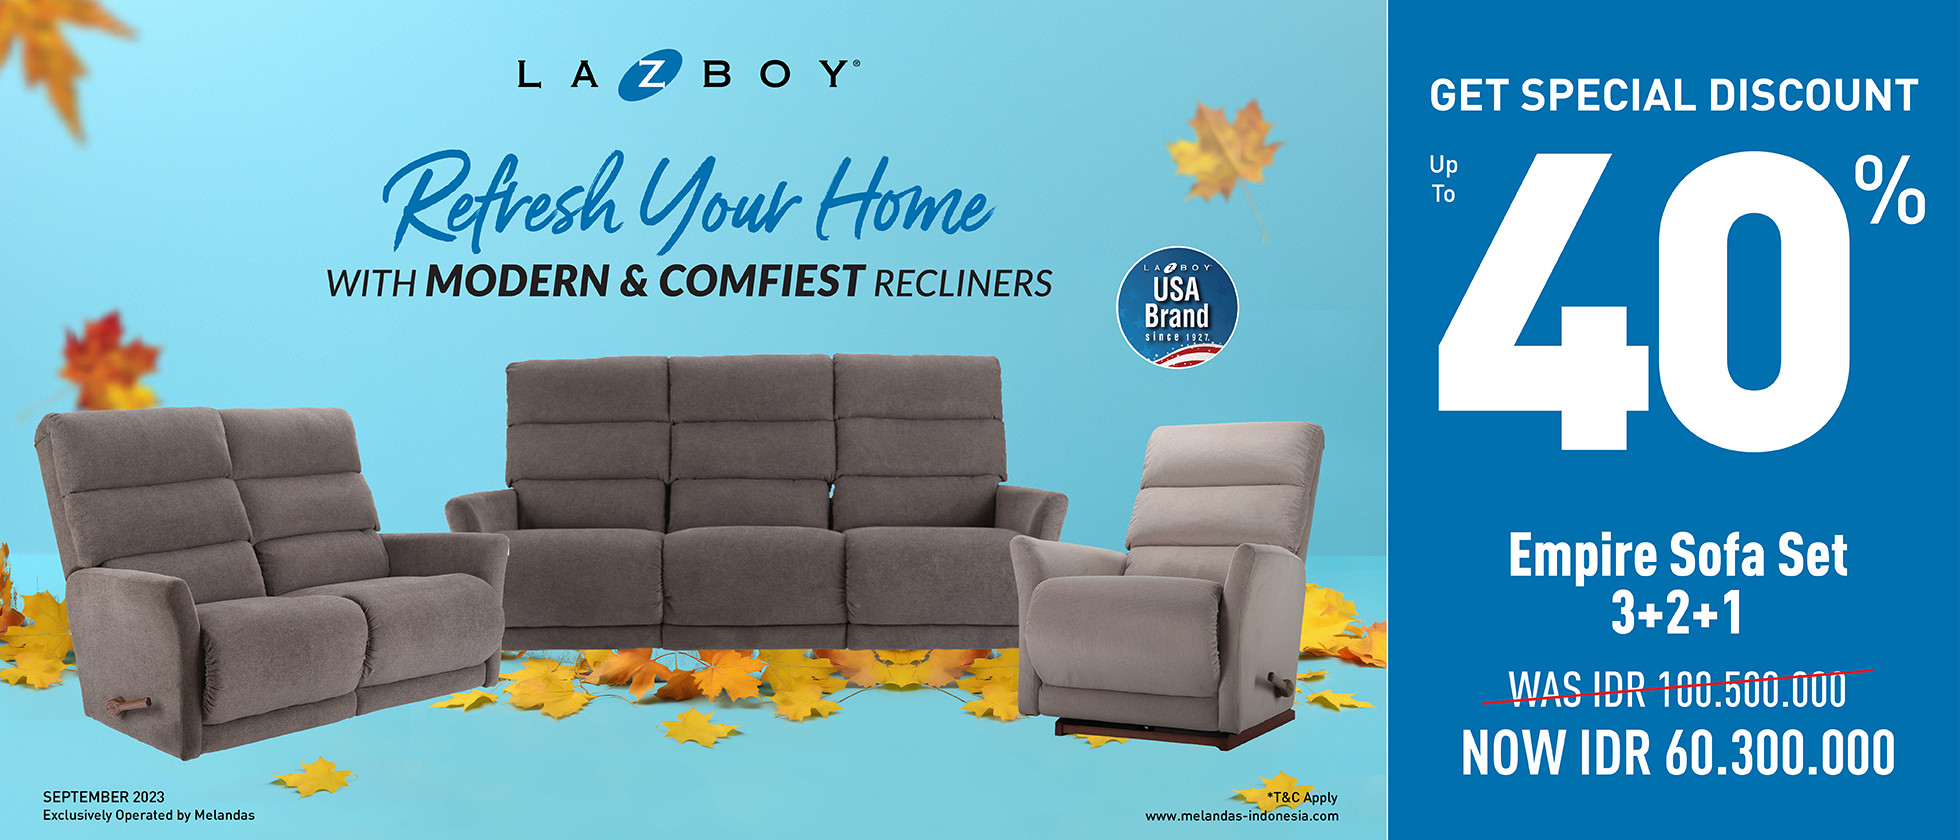 Refresh your Home With  Modern & Comfiest Recliners